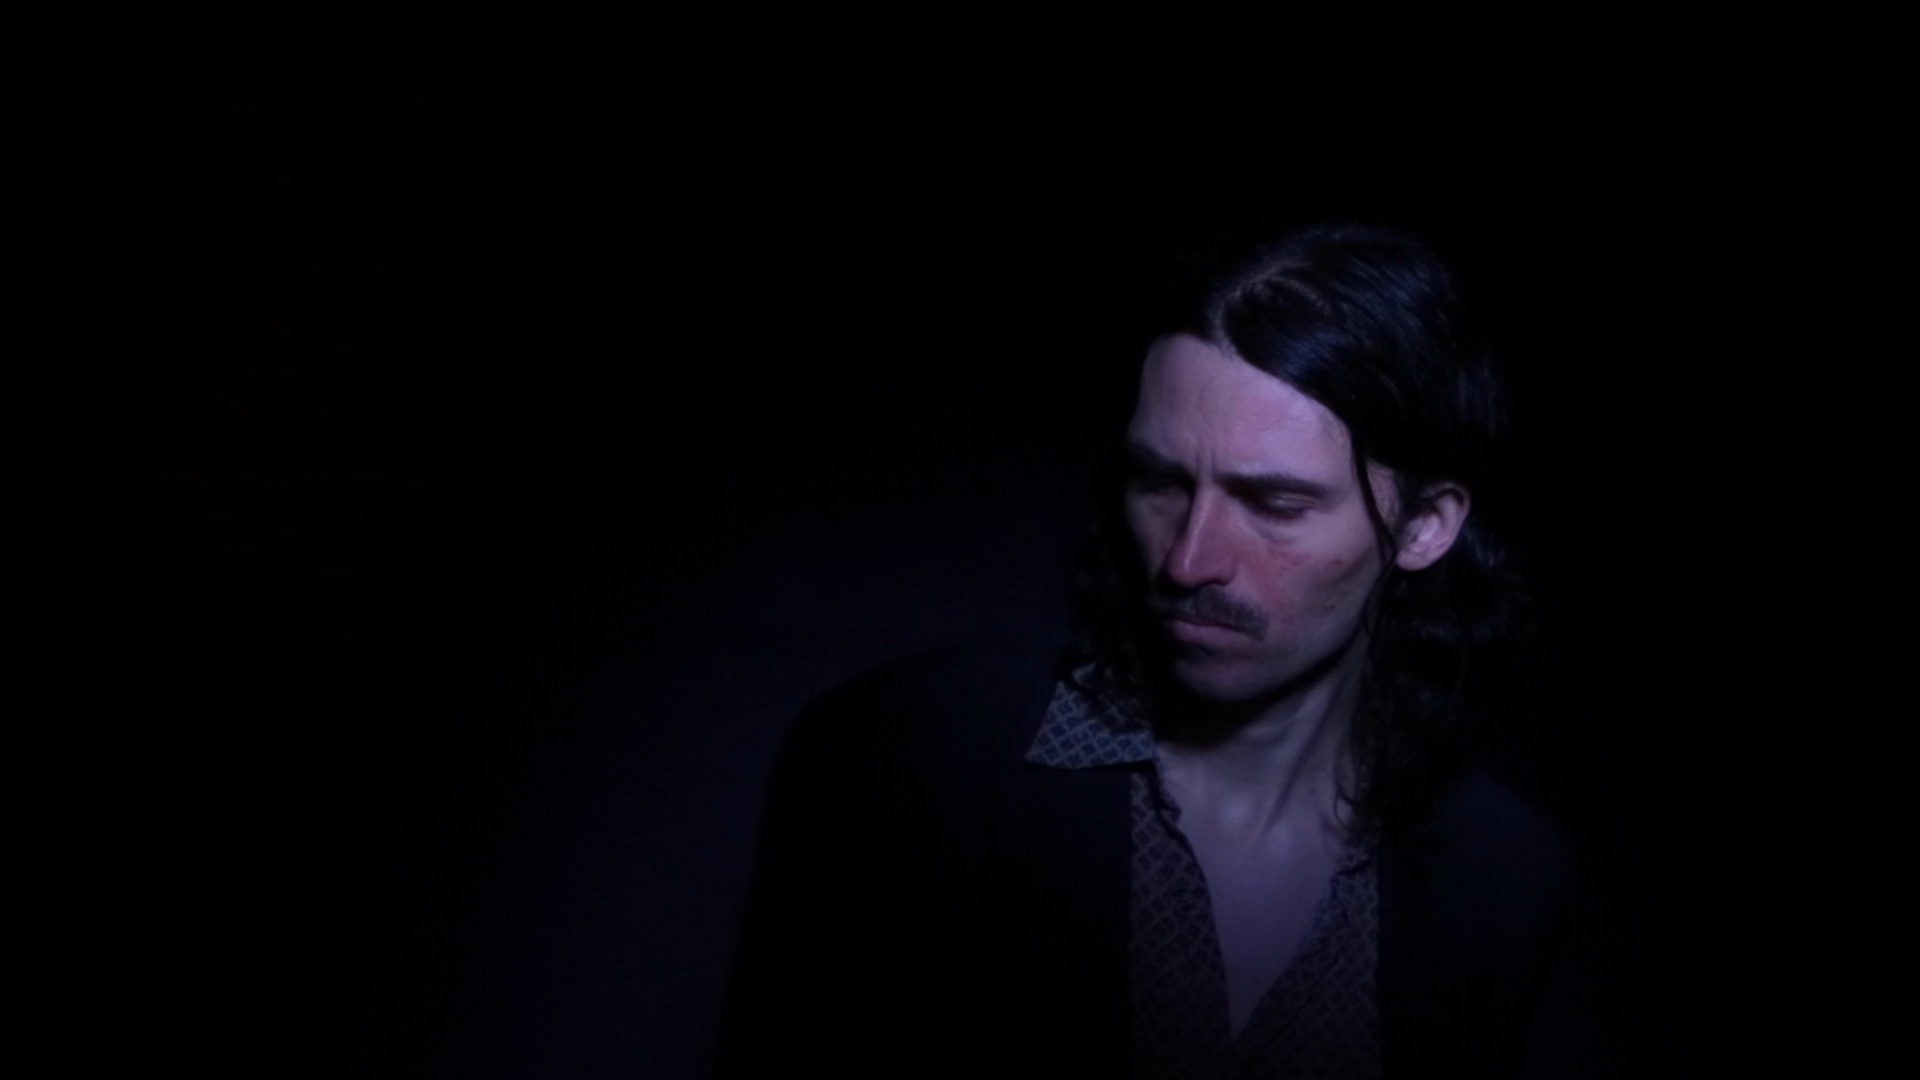 NYC’s Noah Deemer announces debut LP; shares a dark and dreamy video for two of the singles, “Modern Ruins” & “Lay Your Hands” 